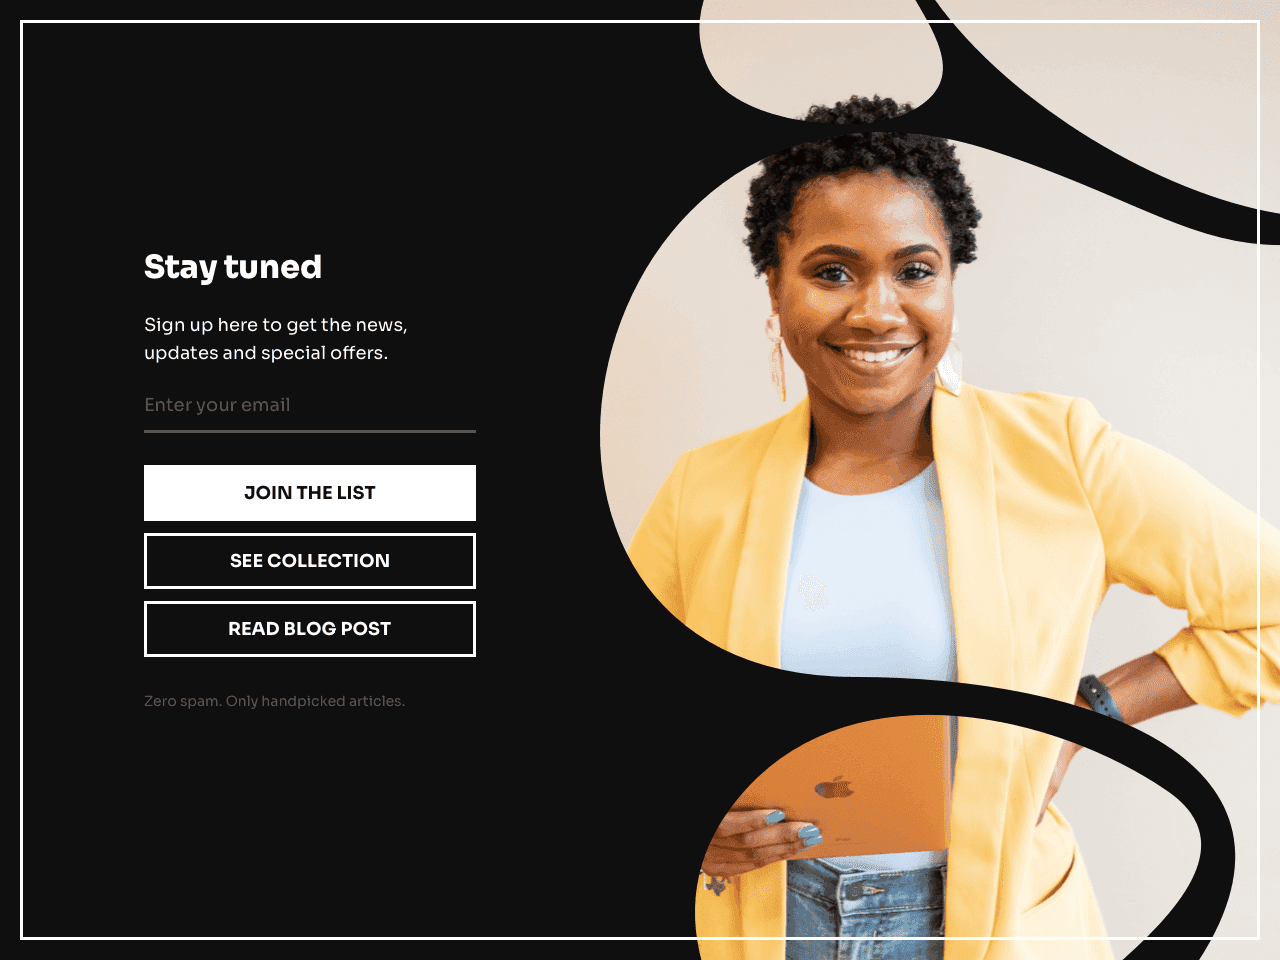 Getform allows for creating a stylish Instagram landing page